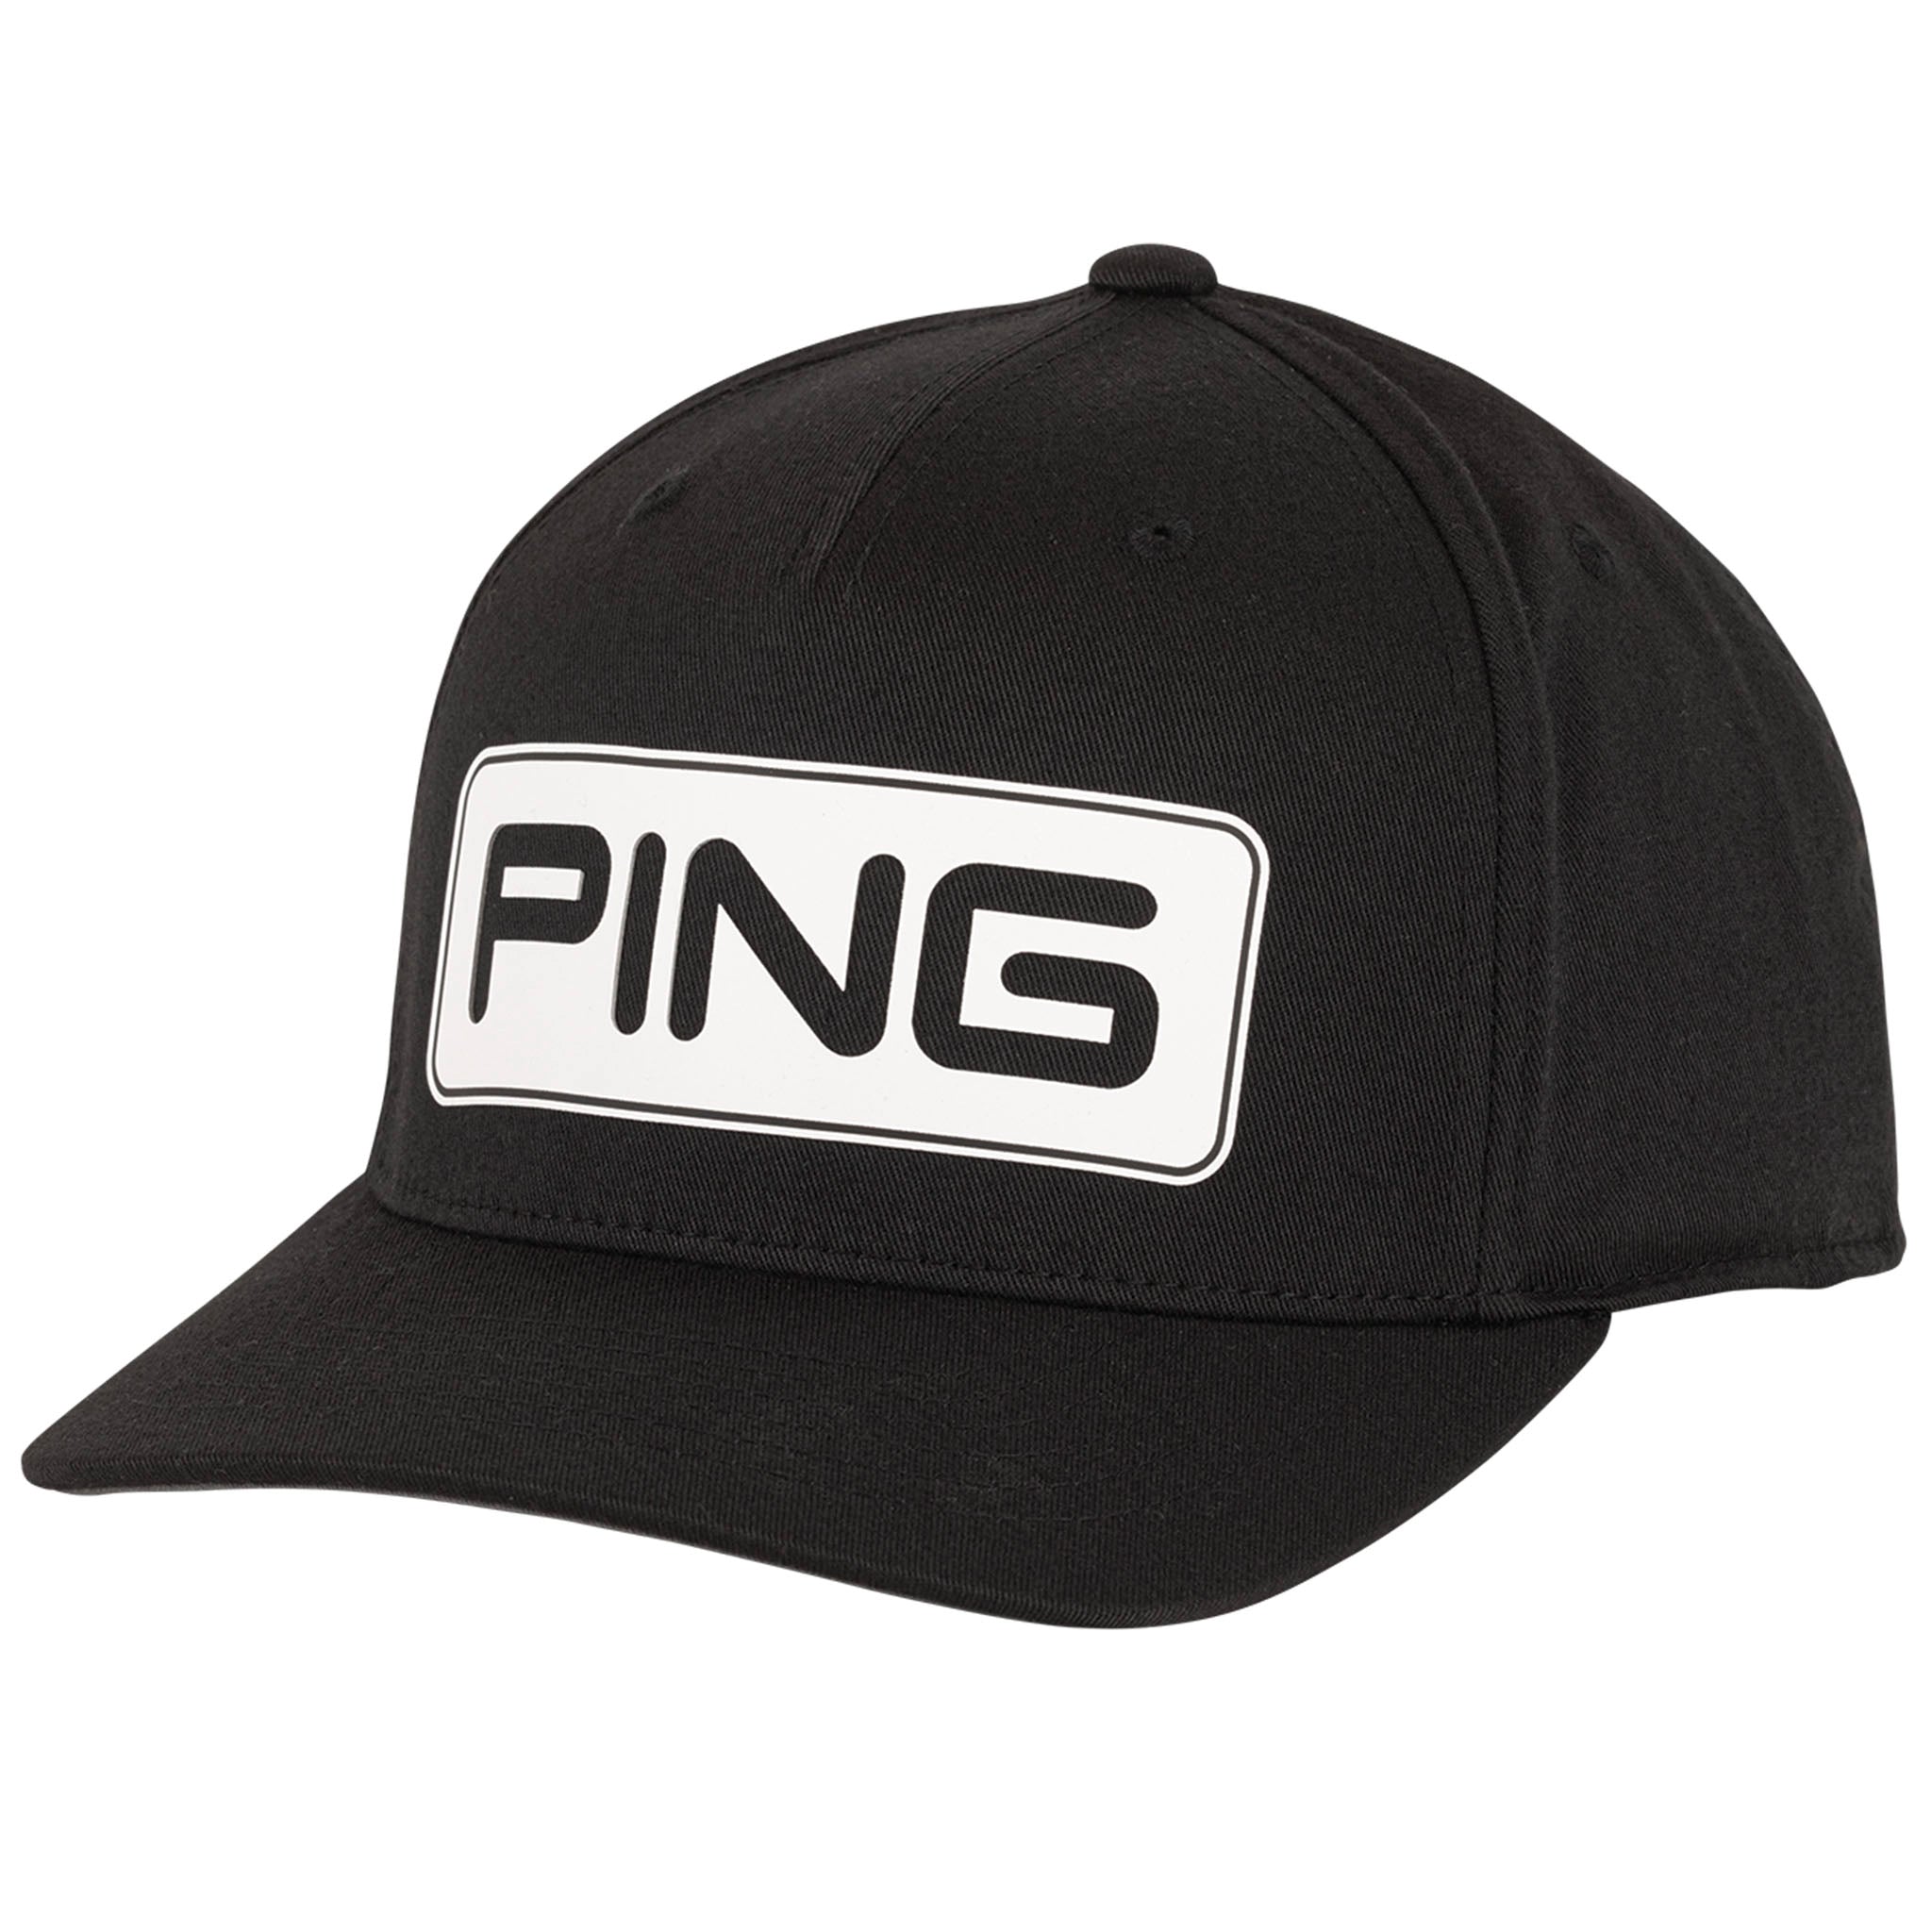 Mens Golf Caps — The of House Golf